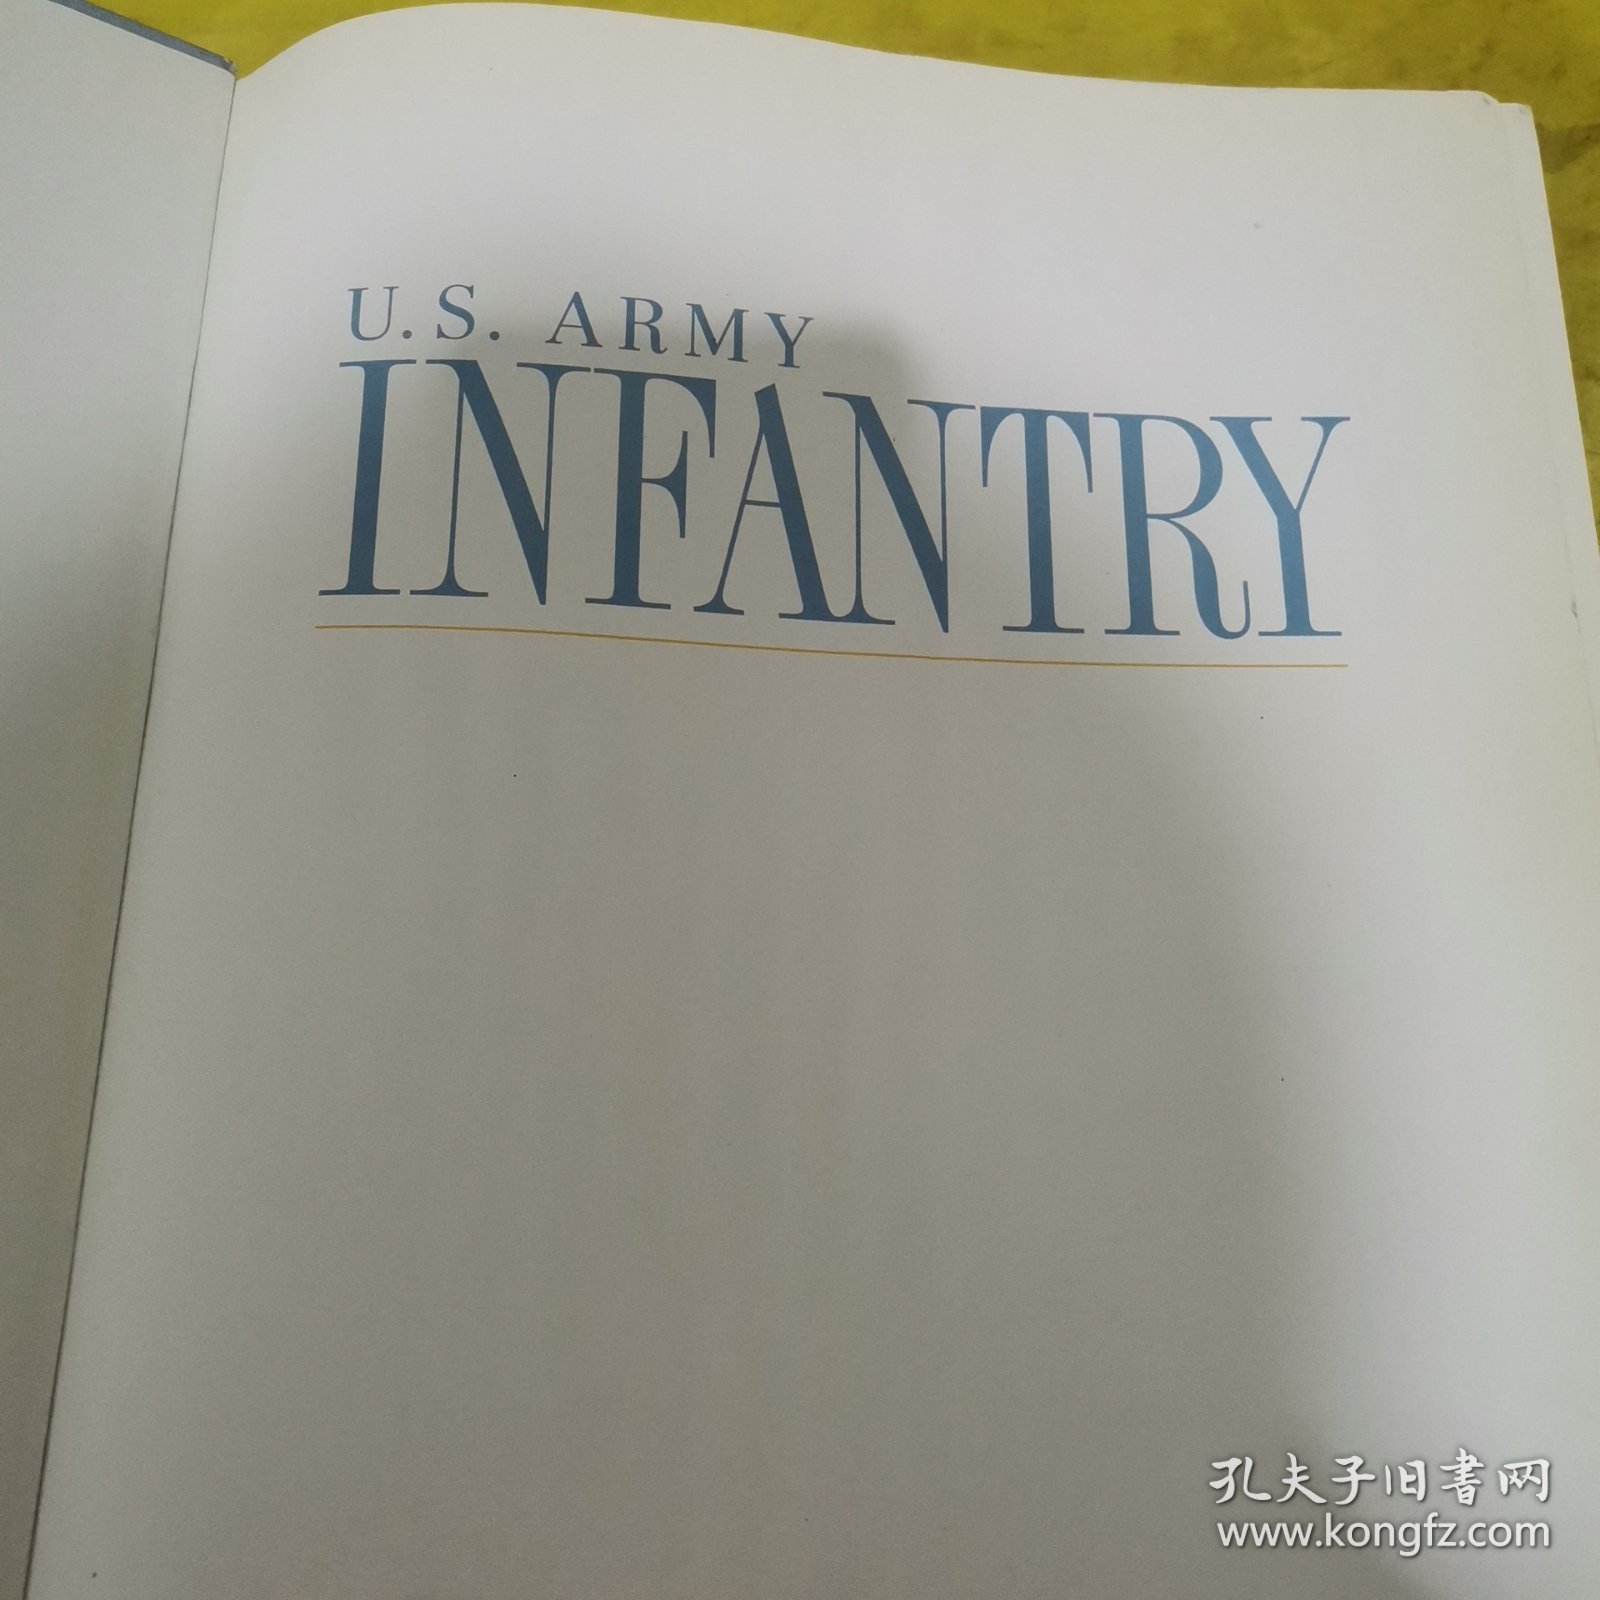 Uniforms and equipment of u.s. army infantry ,lrrps, and rangers in vietnam1965-1971